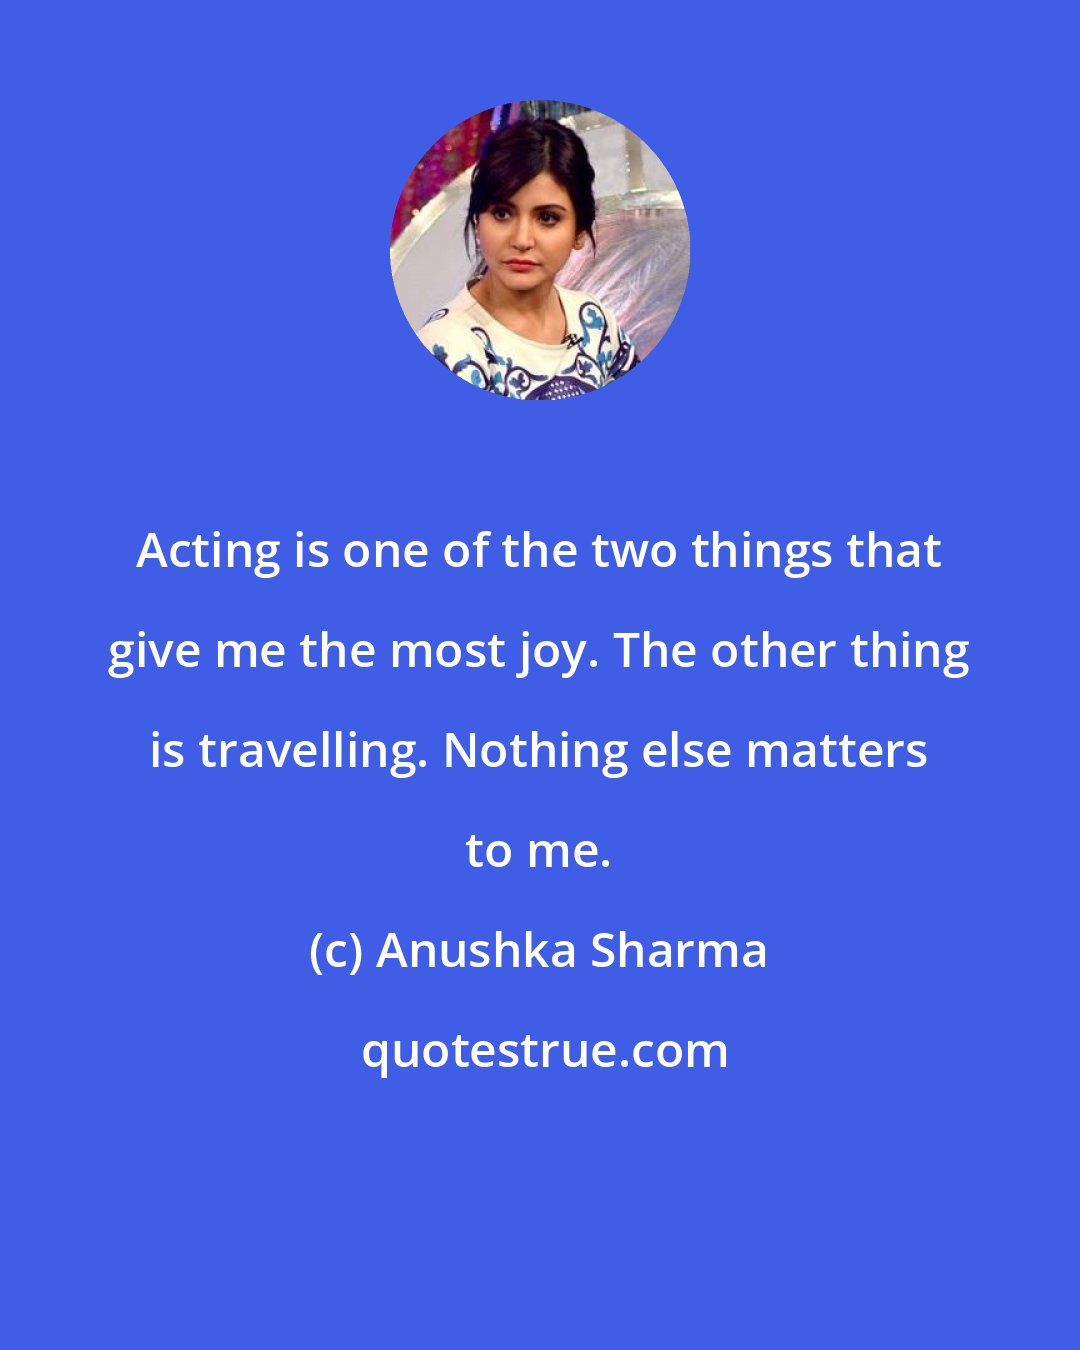 Anushka Sharma: Acting is one of the two things that give me the most joy. The other thing is travelling. Nothing else matters to me.